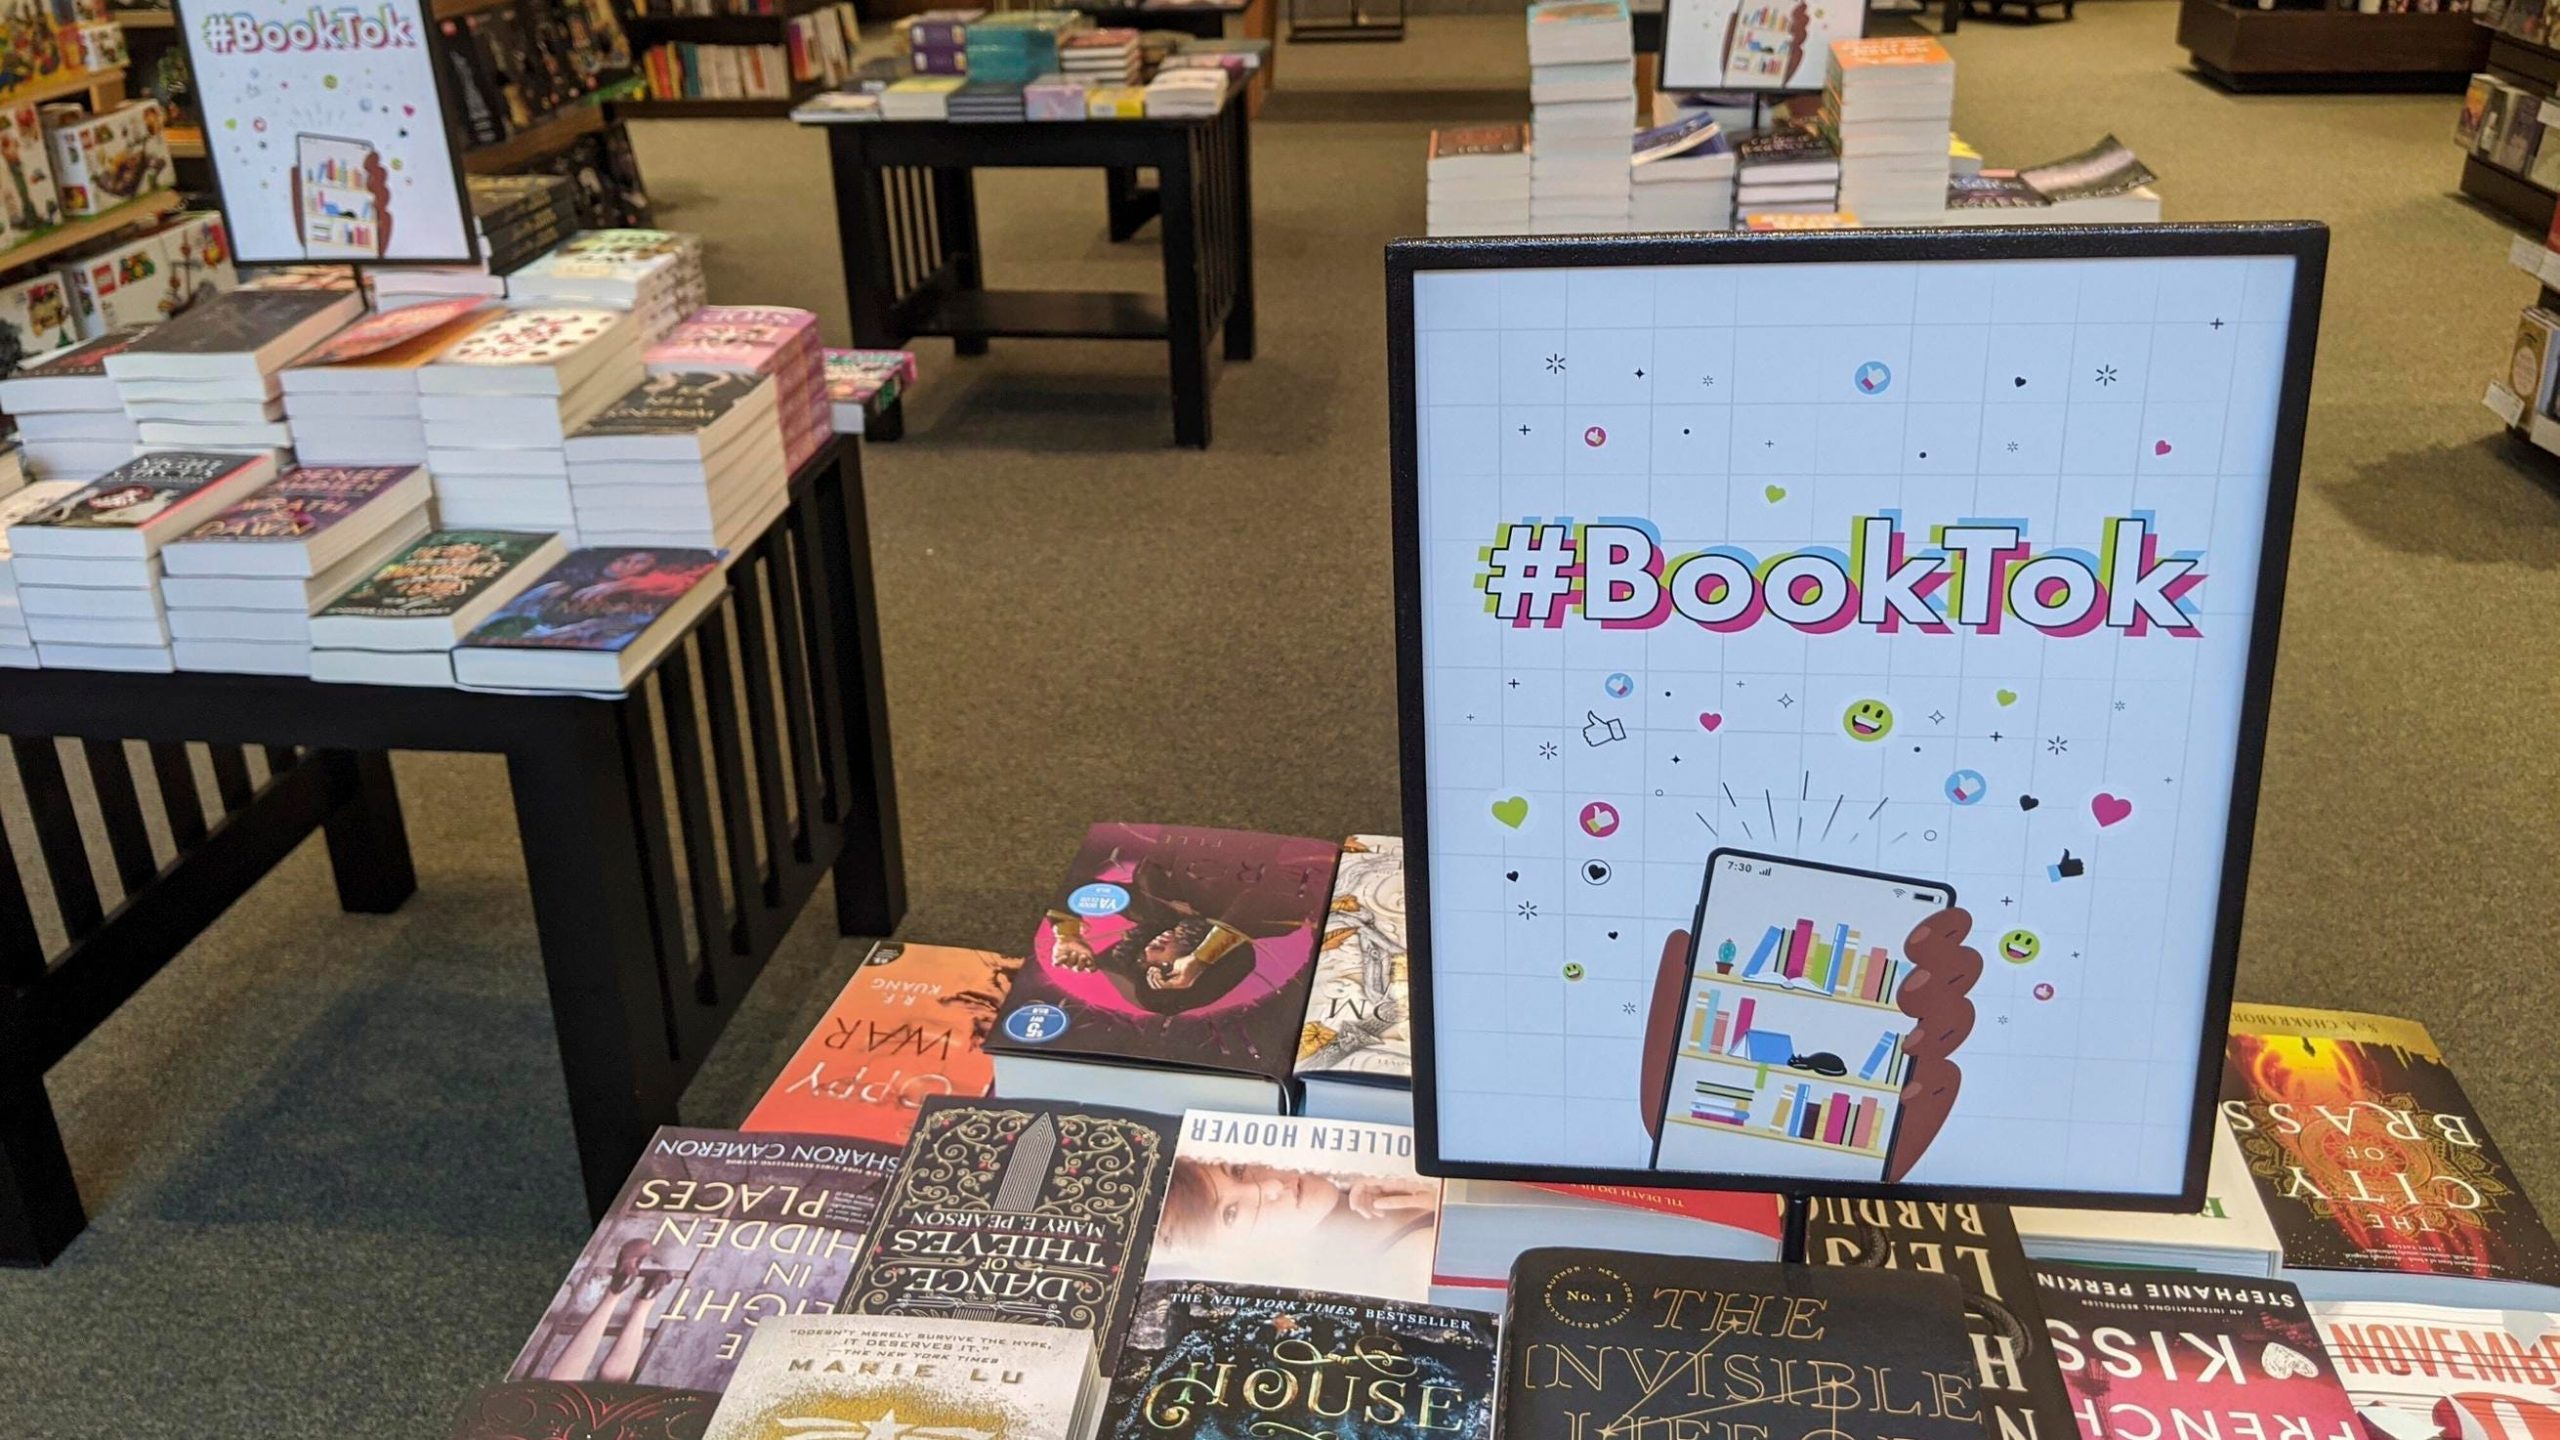 A BookTok table at a Barnes and Noble in Scottsdale, Arizona.